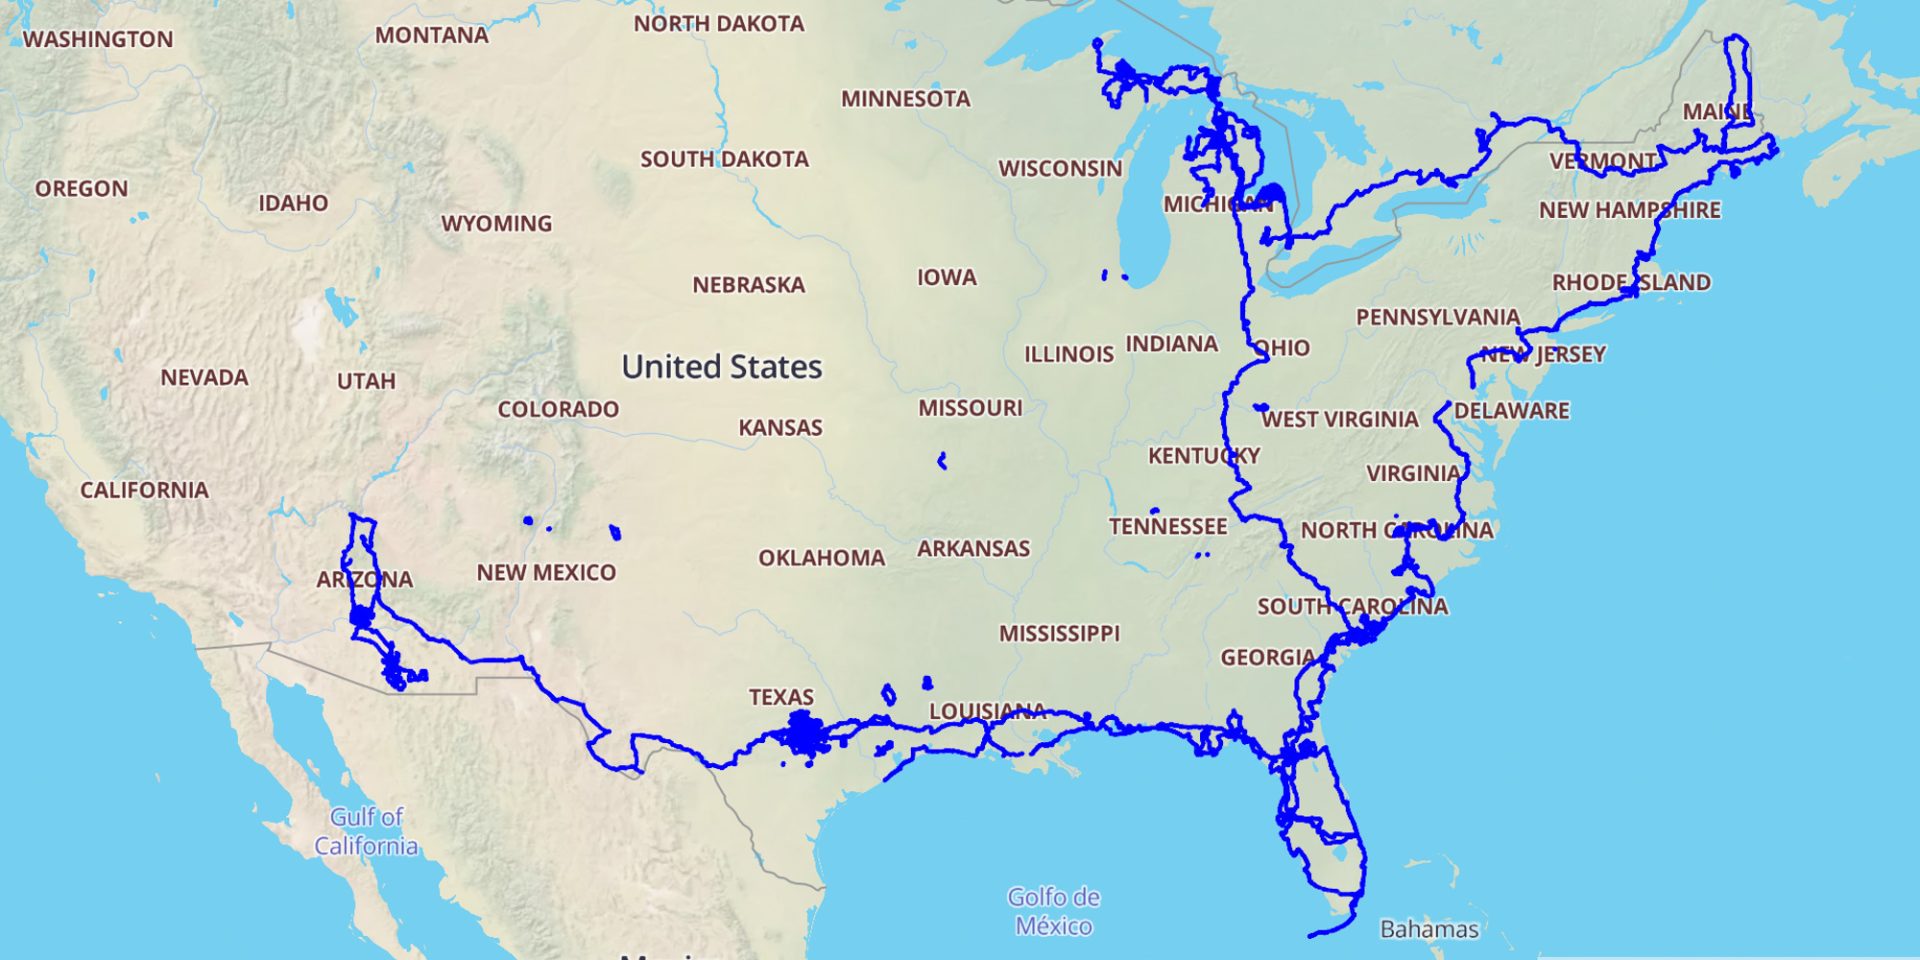 Bingesser's route in 2023, showing dense clusters around Tucson, Tempe, and Austin, as well as a long west-east route from Arizona into Florida, and then up the eastern seaboard, west through the Great Lakes, and back down to the Carolinas.